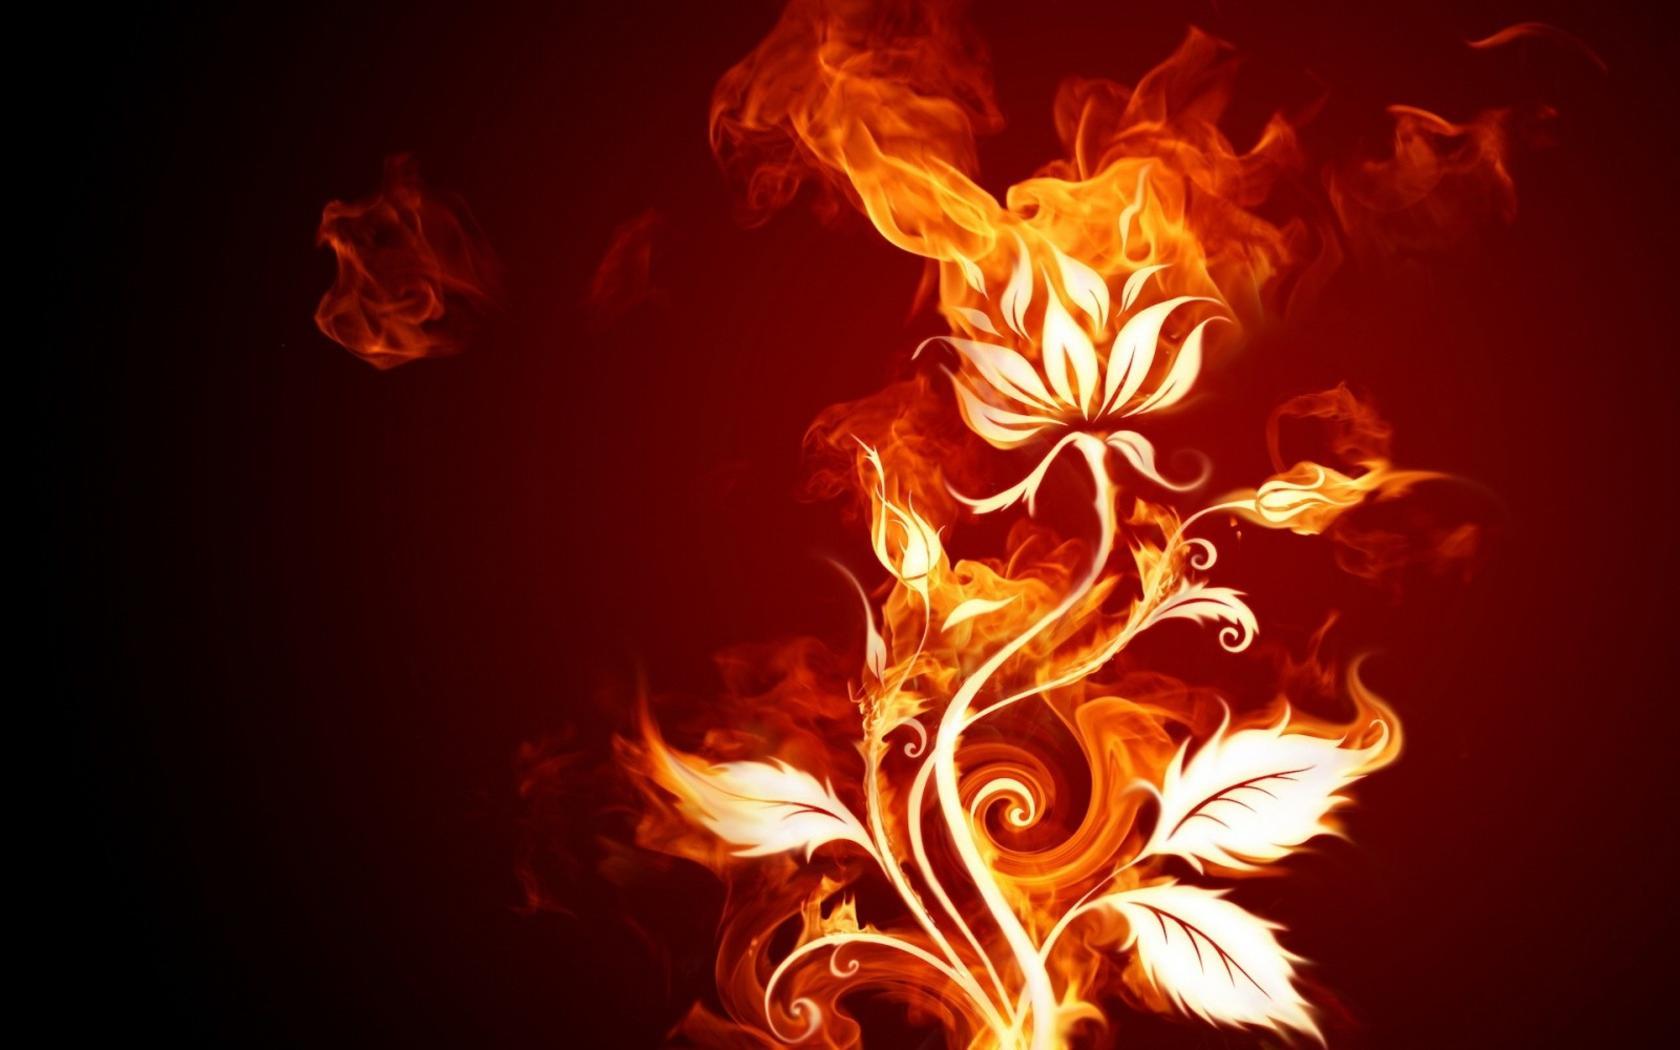 Fire Background Top Image. Beautiful image HD Picture & Desktop